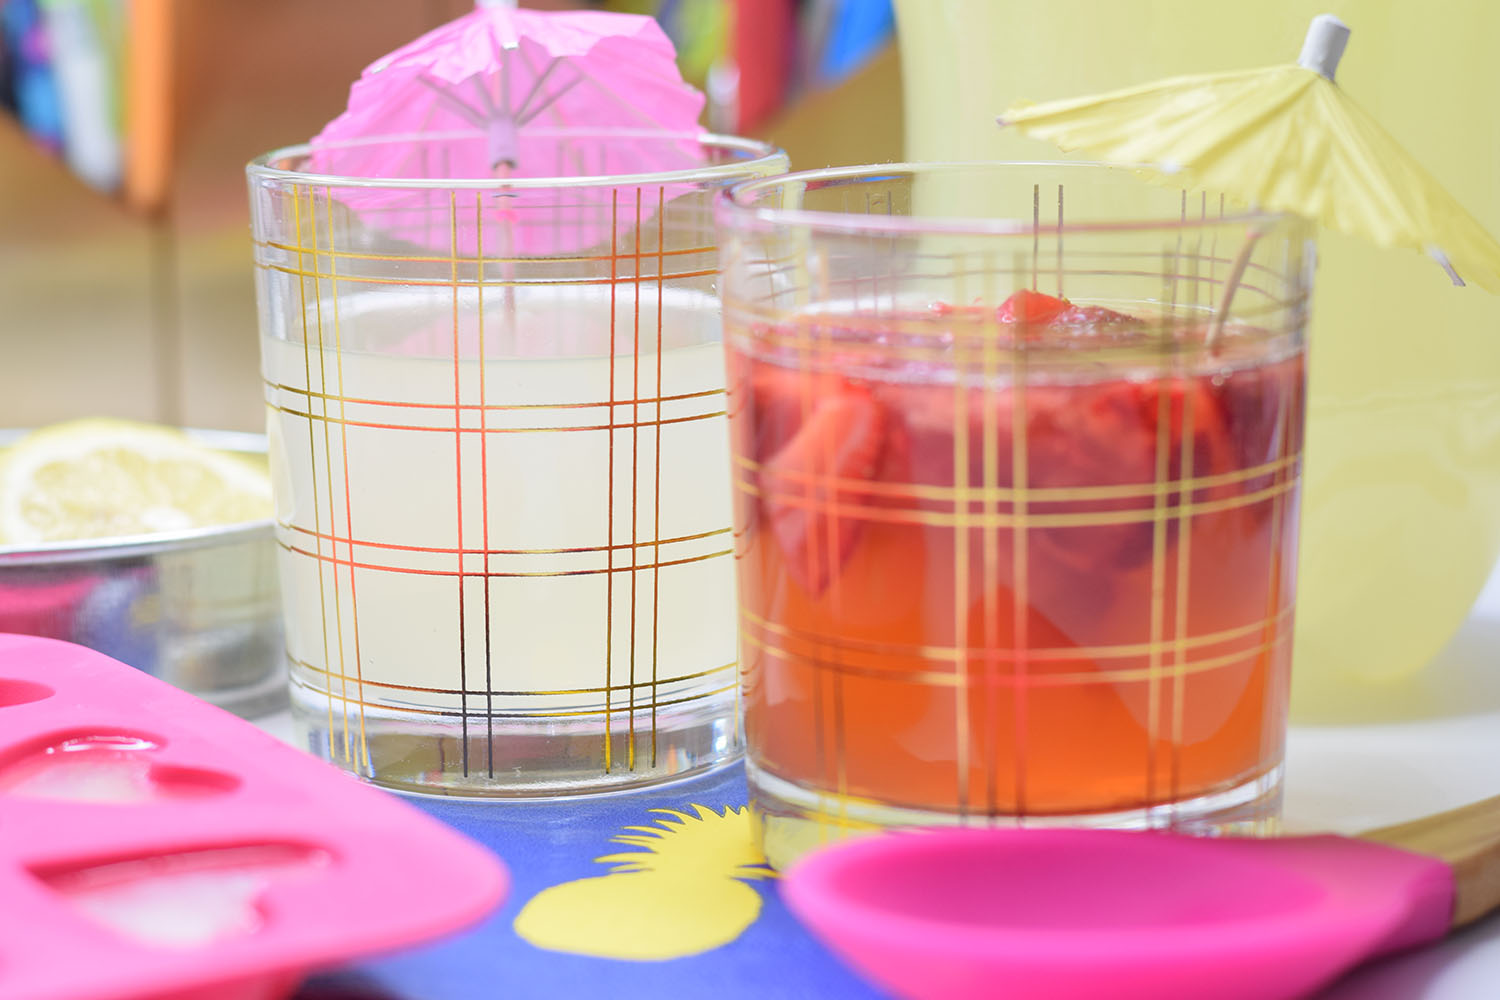 How to Make a DIY Lemonade Stand for Your Next Family Gathering